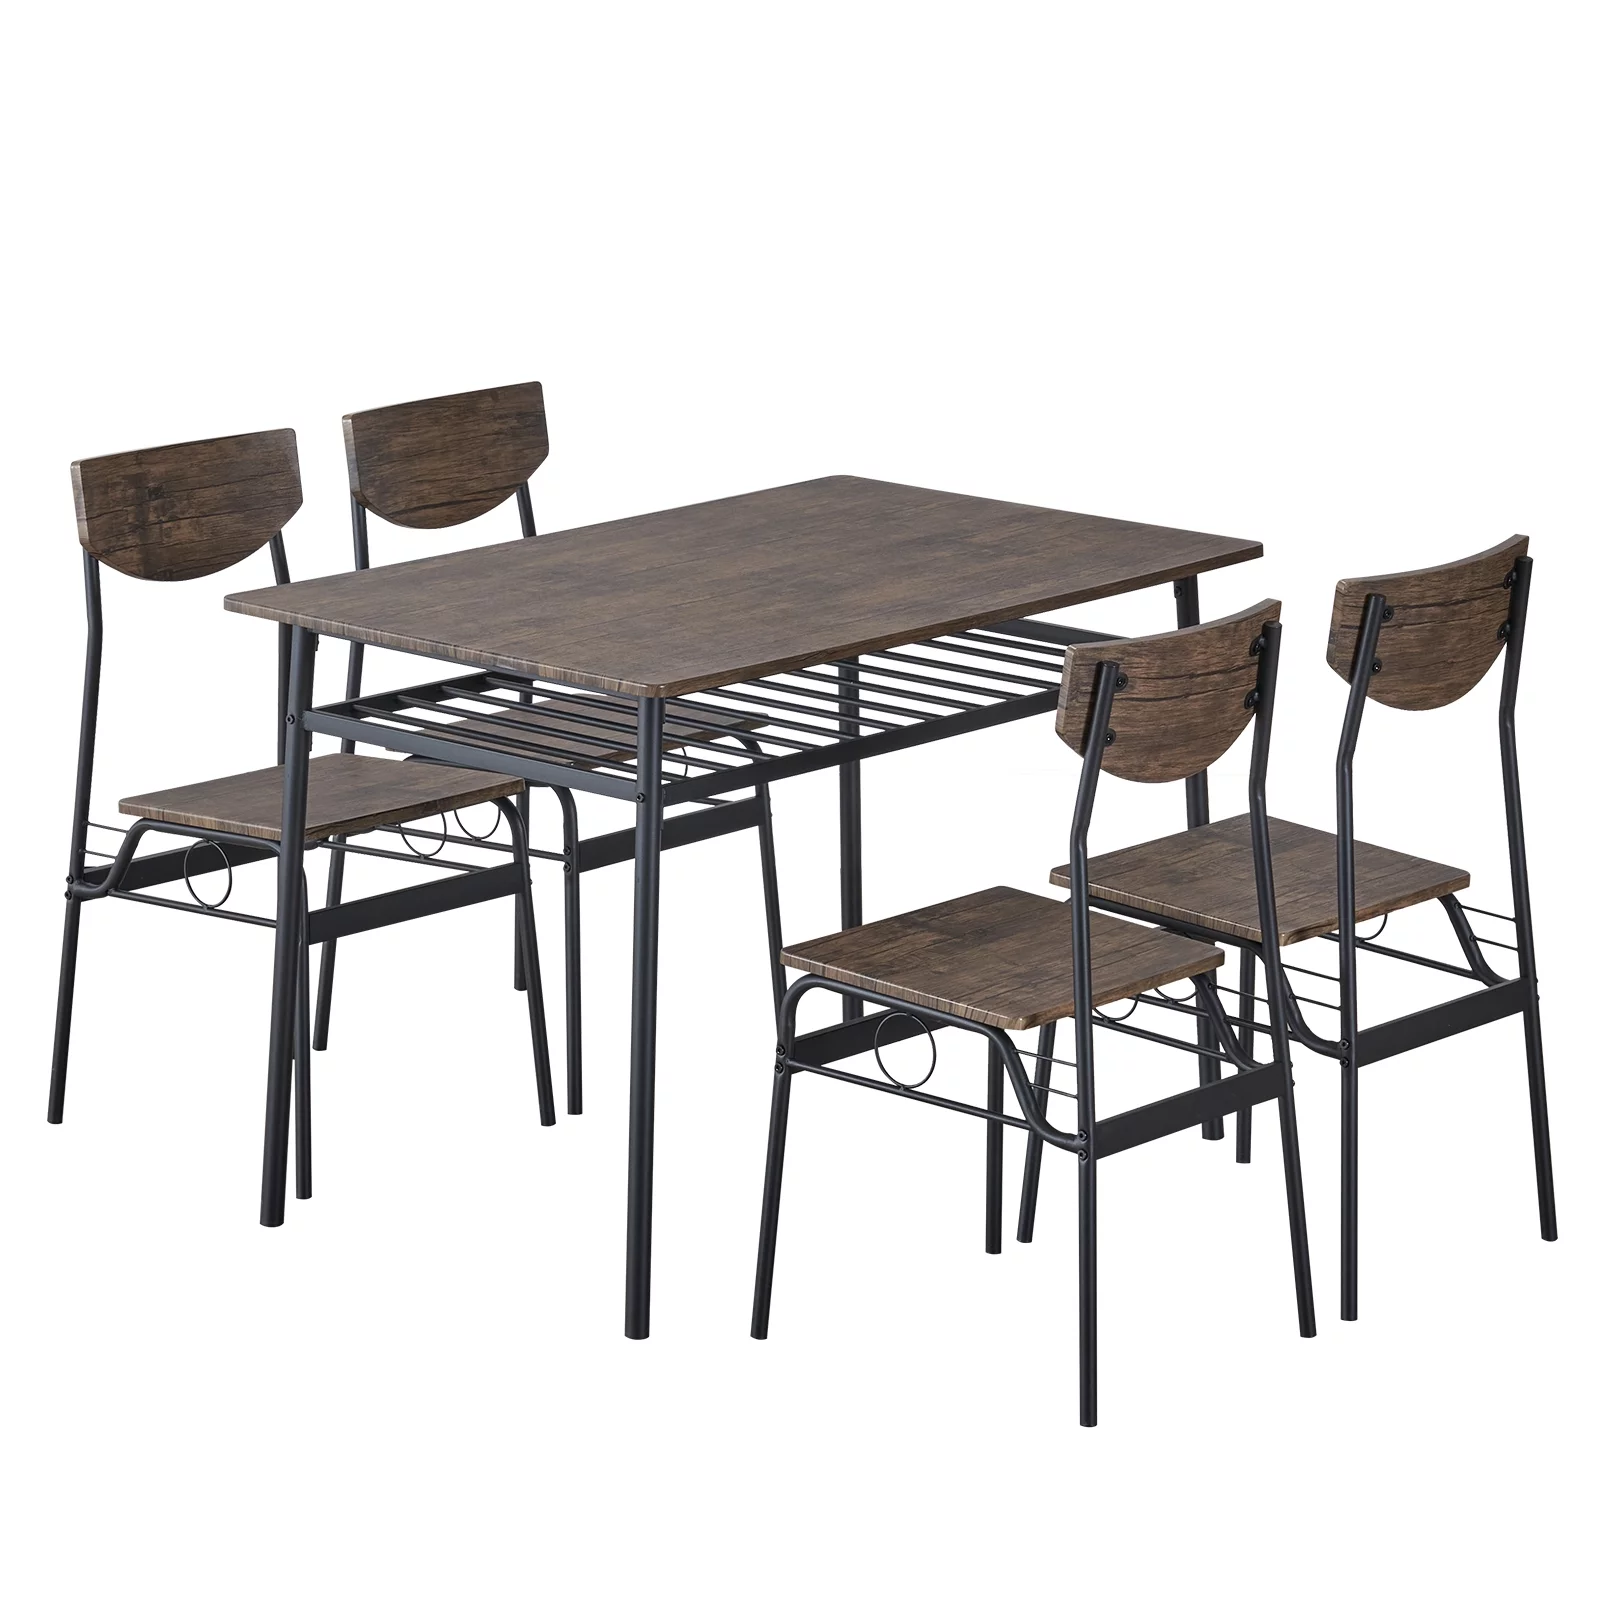 Ktaxon 5 Pieces Dining Table and Chair Set, Breakfast Diner Table Set with 4 Chairs and Shelf for Kitchen Dining Room Brown